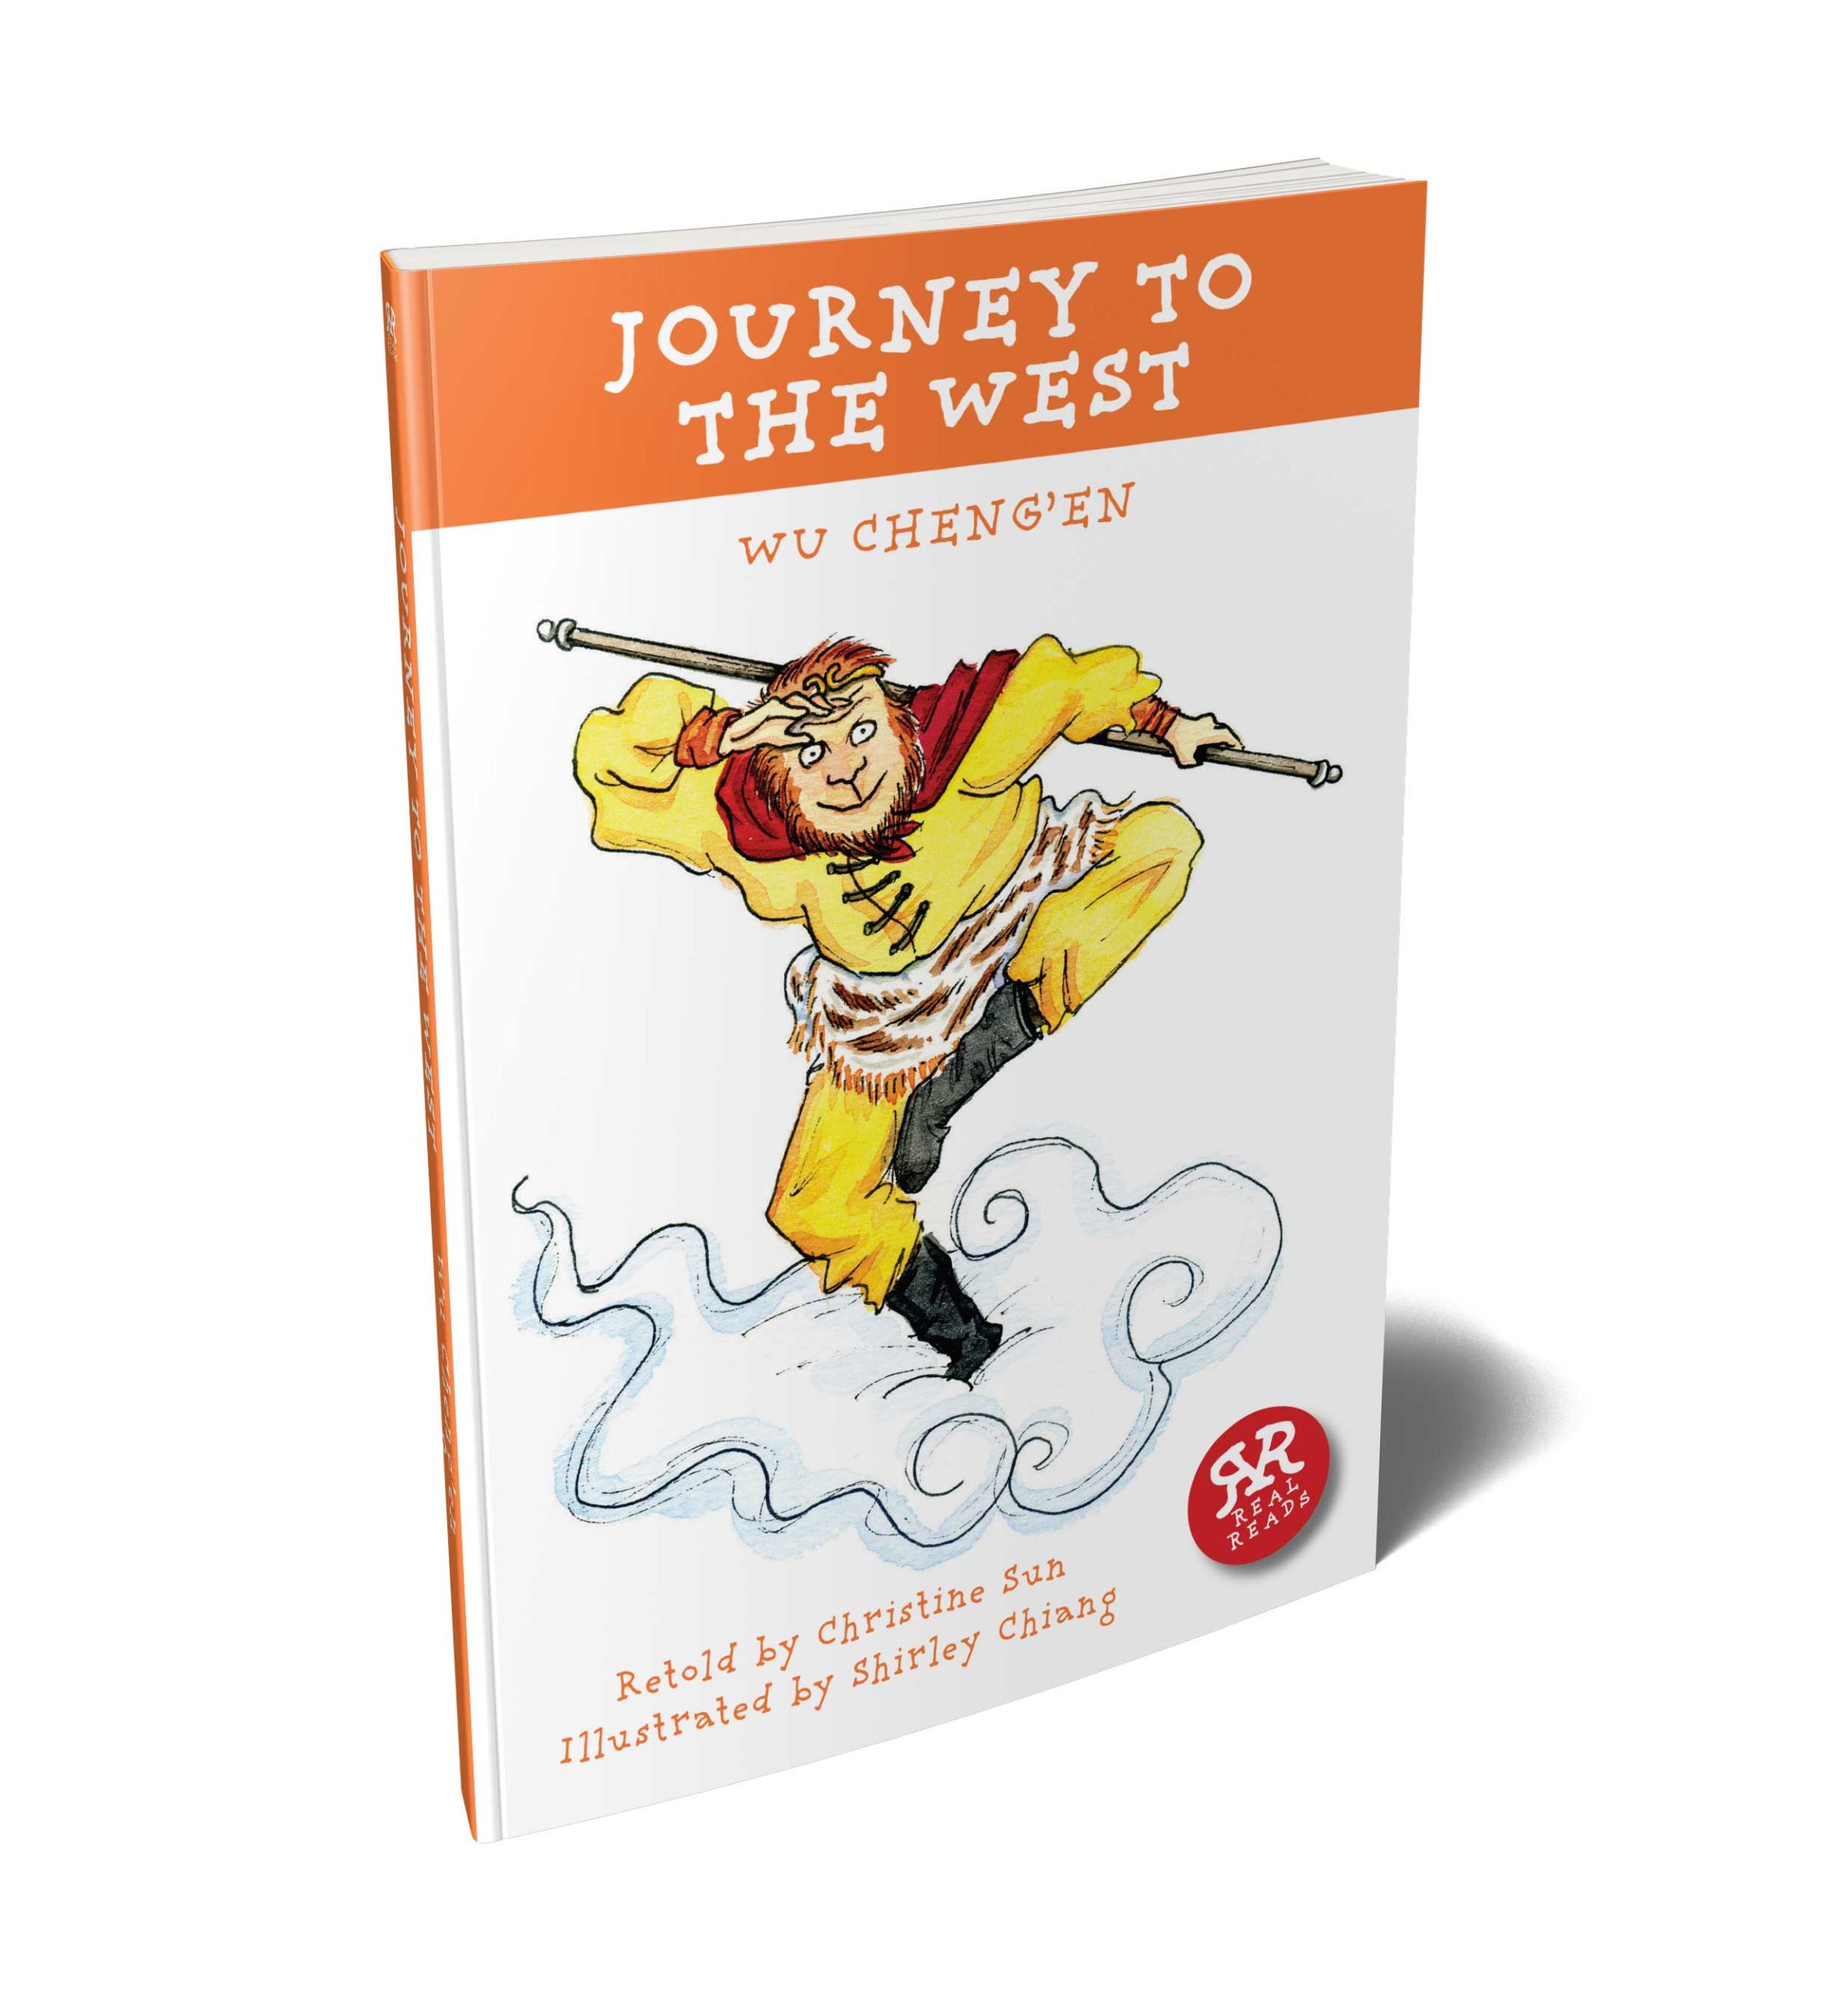 download the new Journey to the West